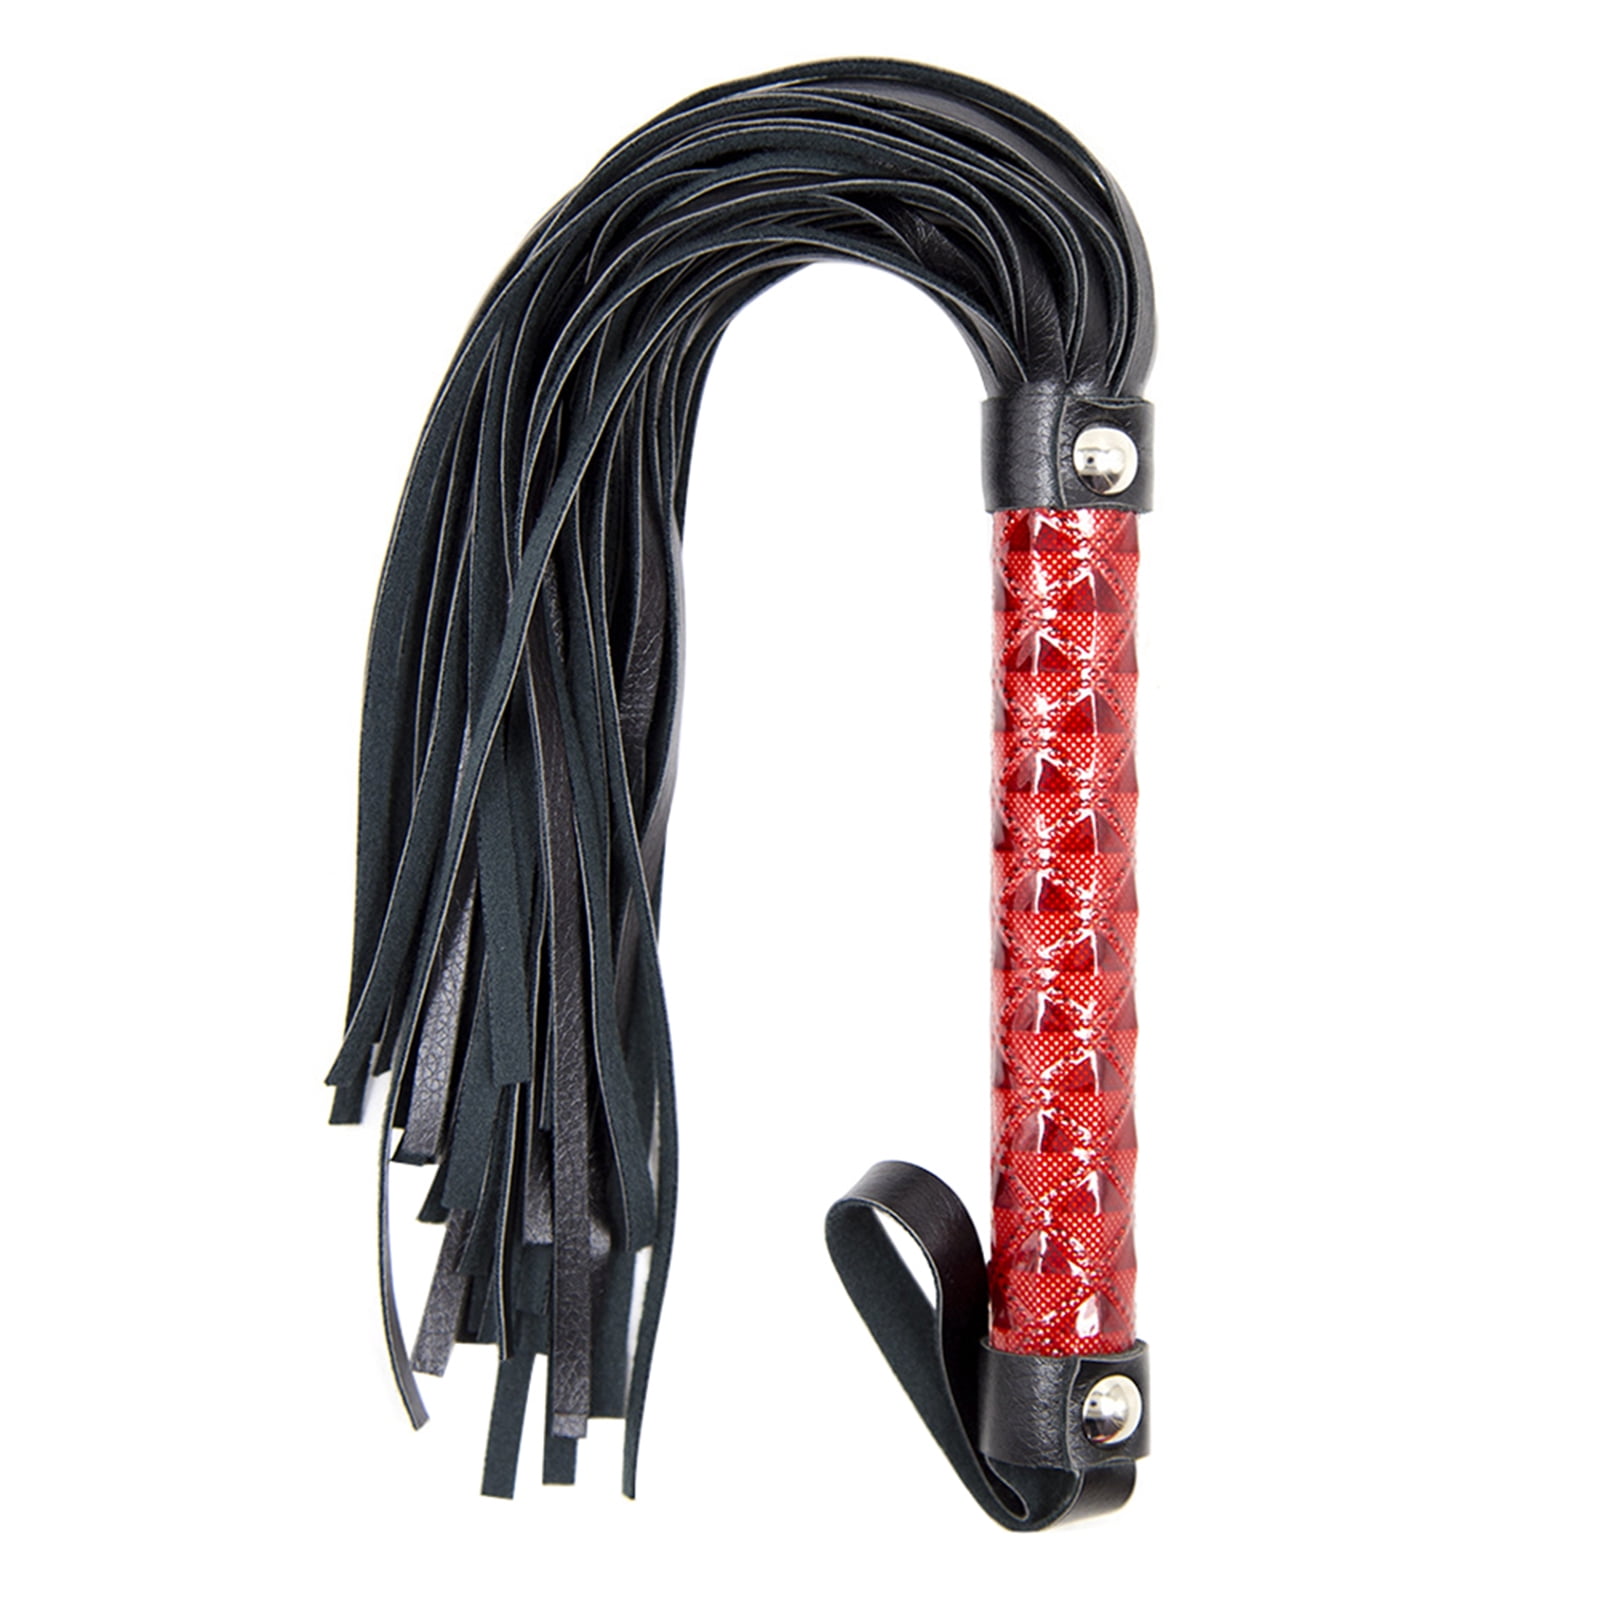 Horse Training Tool Details about   METAL KNOB Leather Flogger Whip BLACK